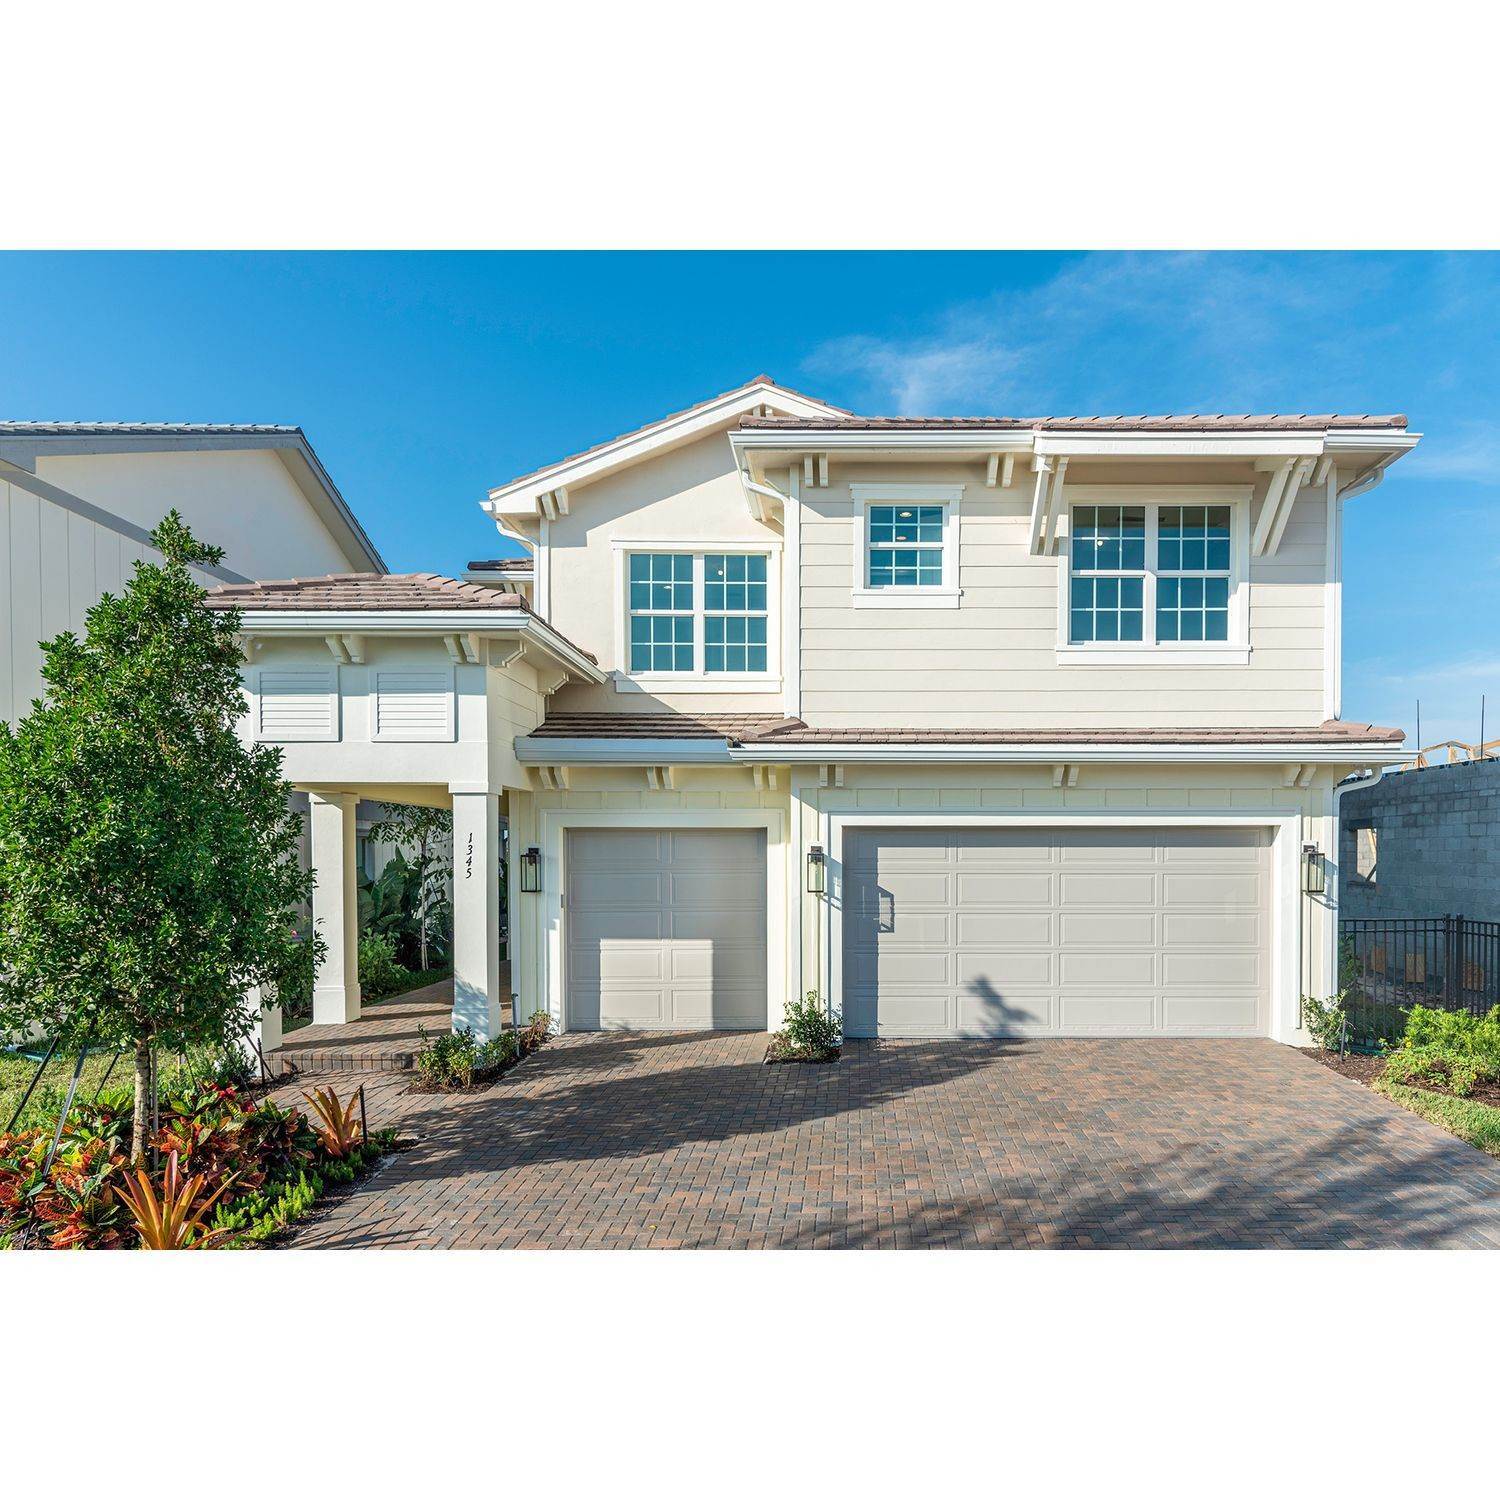 Single Family for Sale at Monterey 1345 Harvester Crossing LOXAHATCHEE, FLORIDA 33470 UNITED STATES